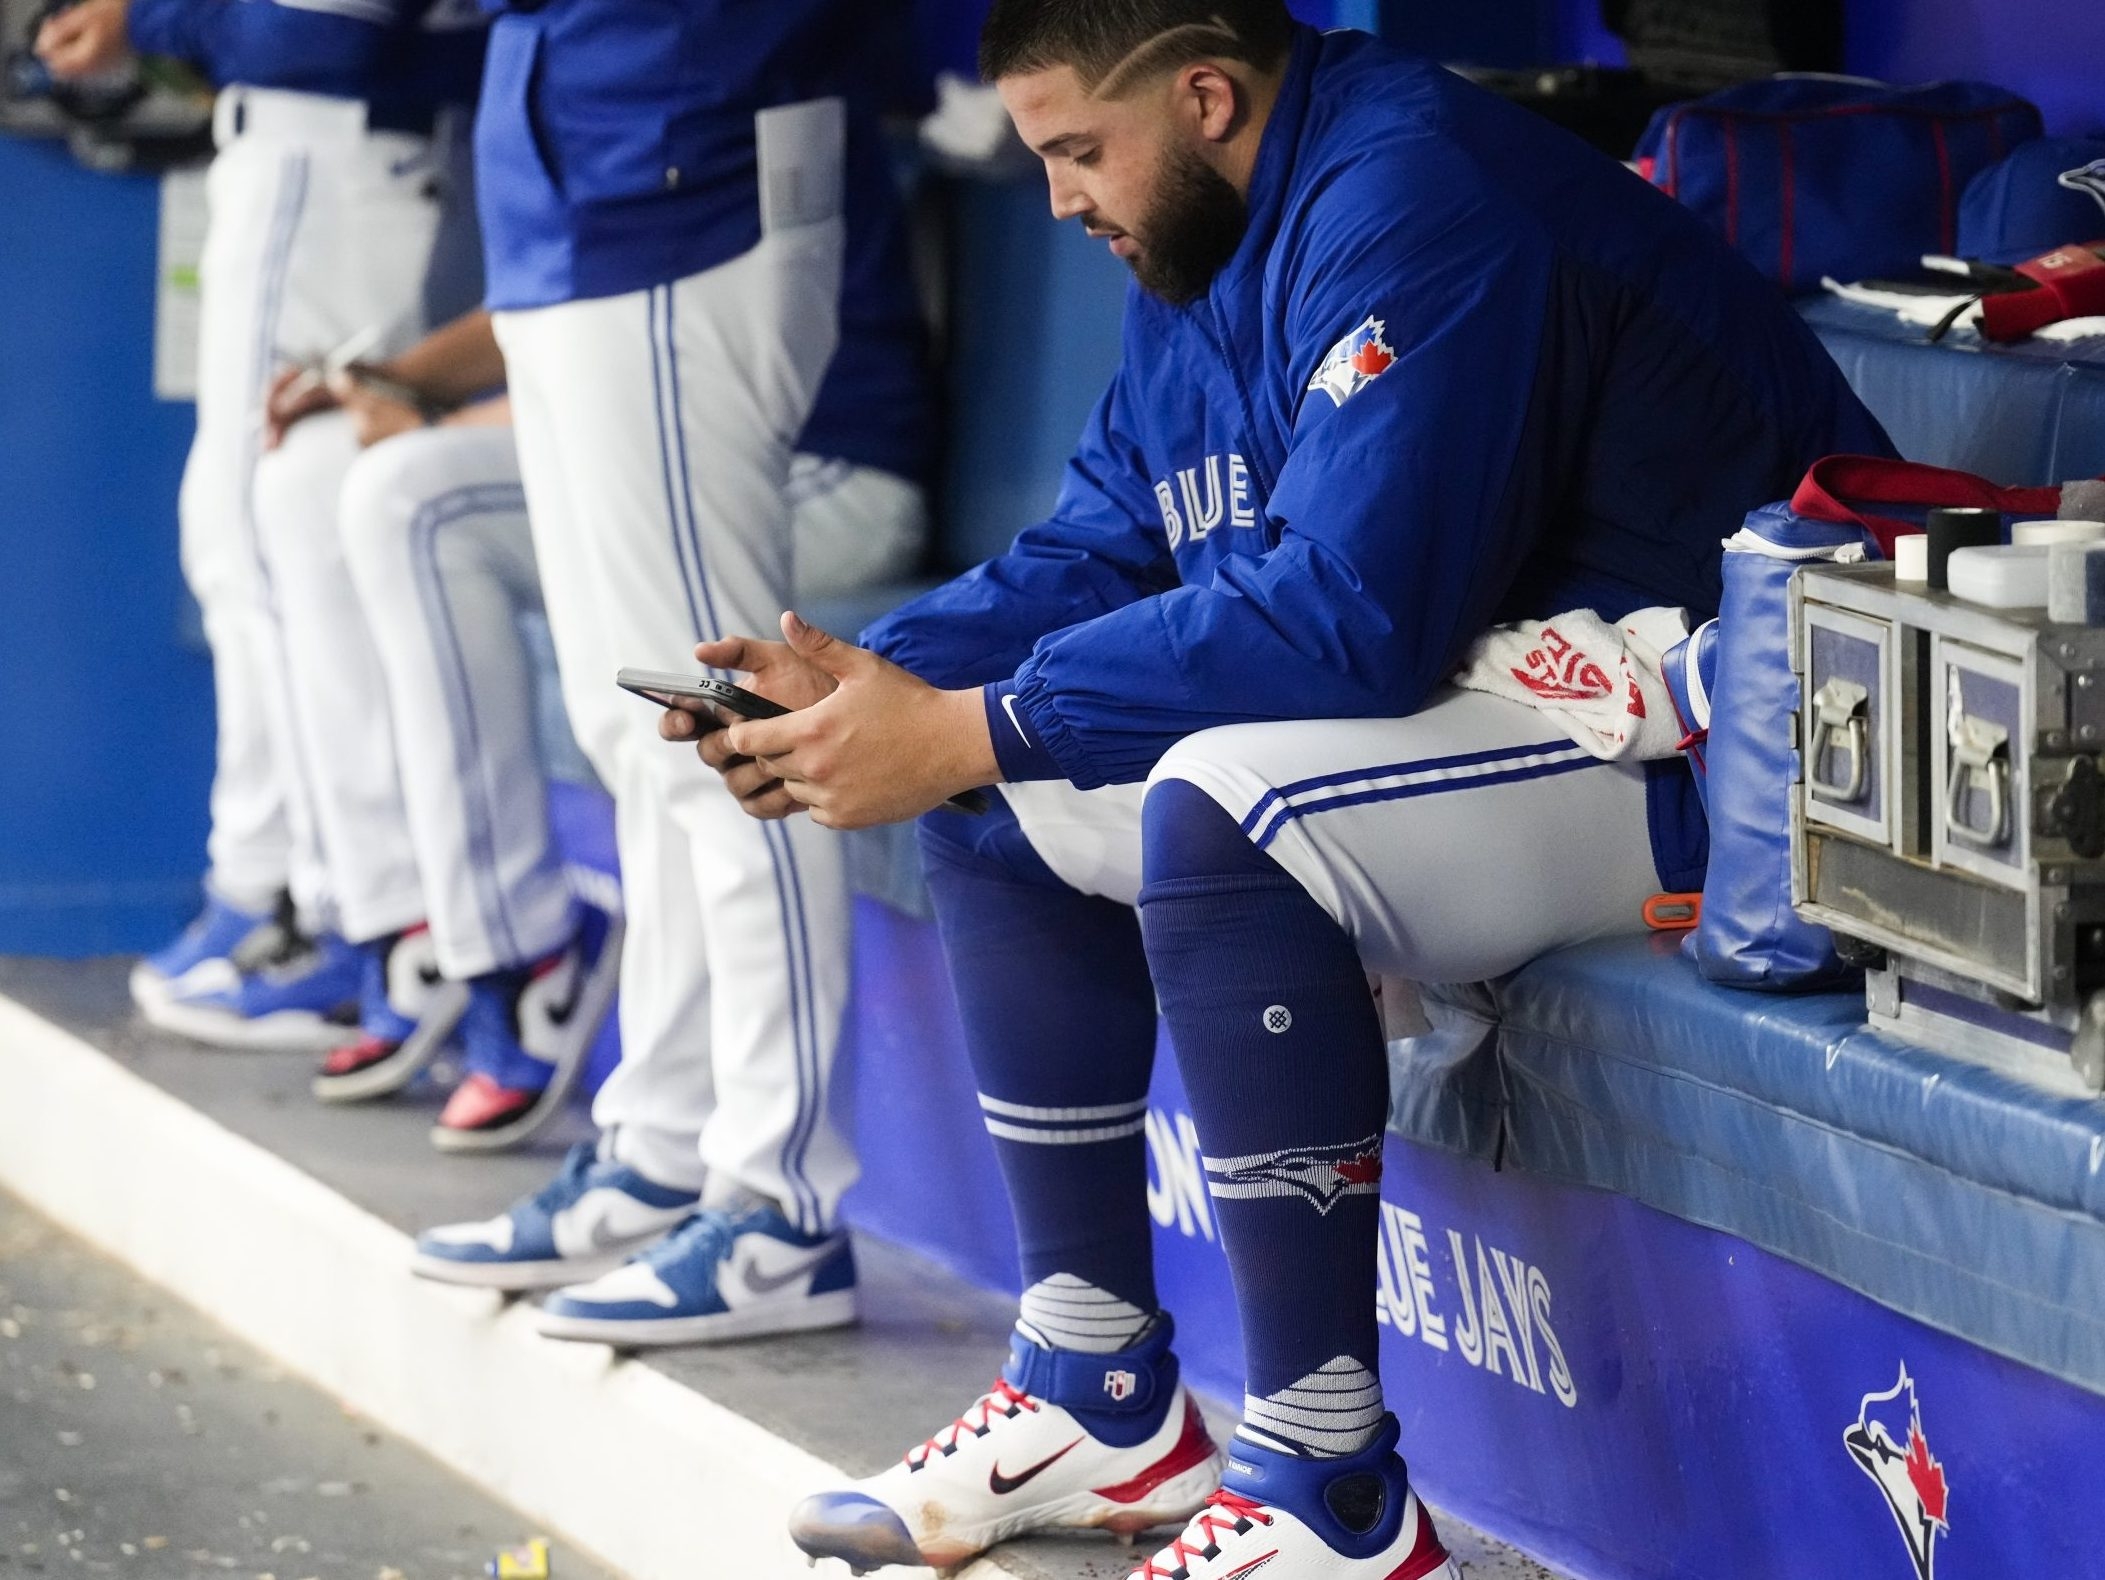 White Rock All-Stars applauded at Toronto Blue Jays' game